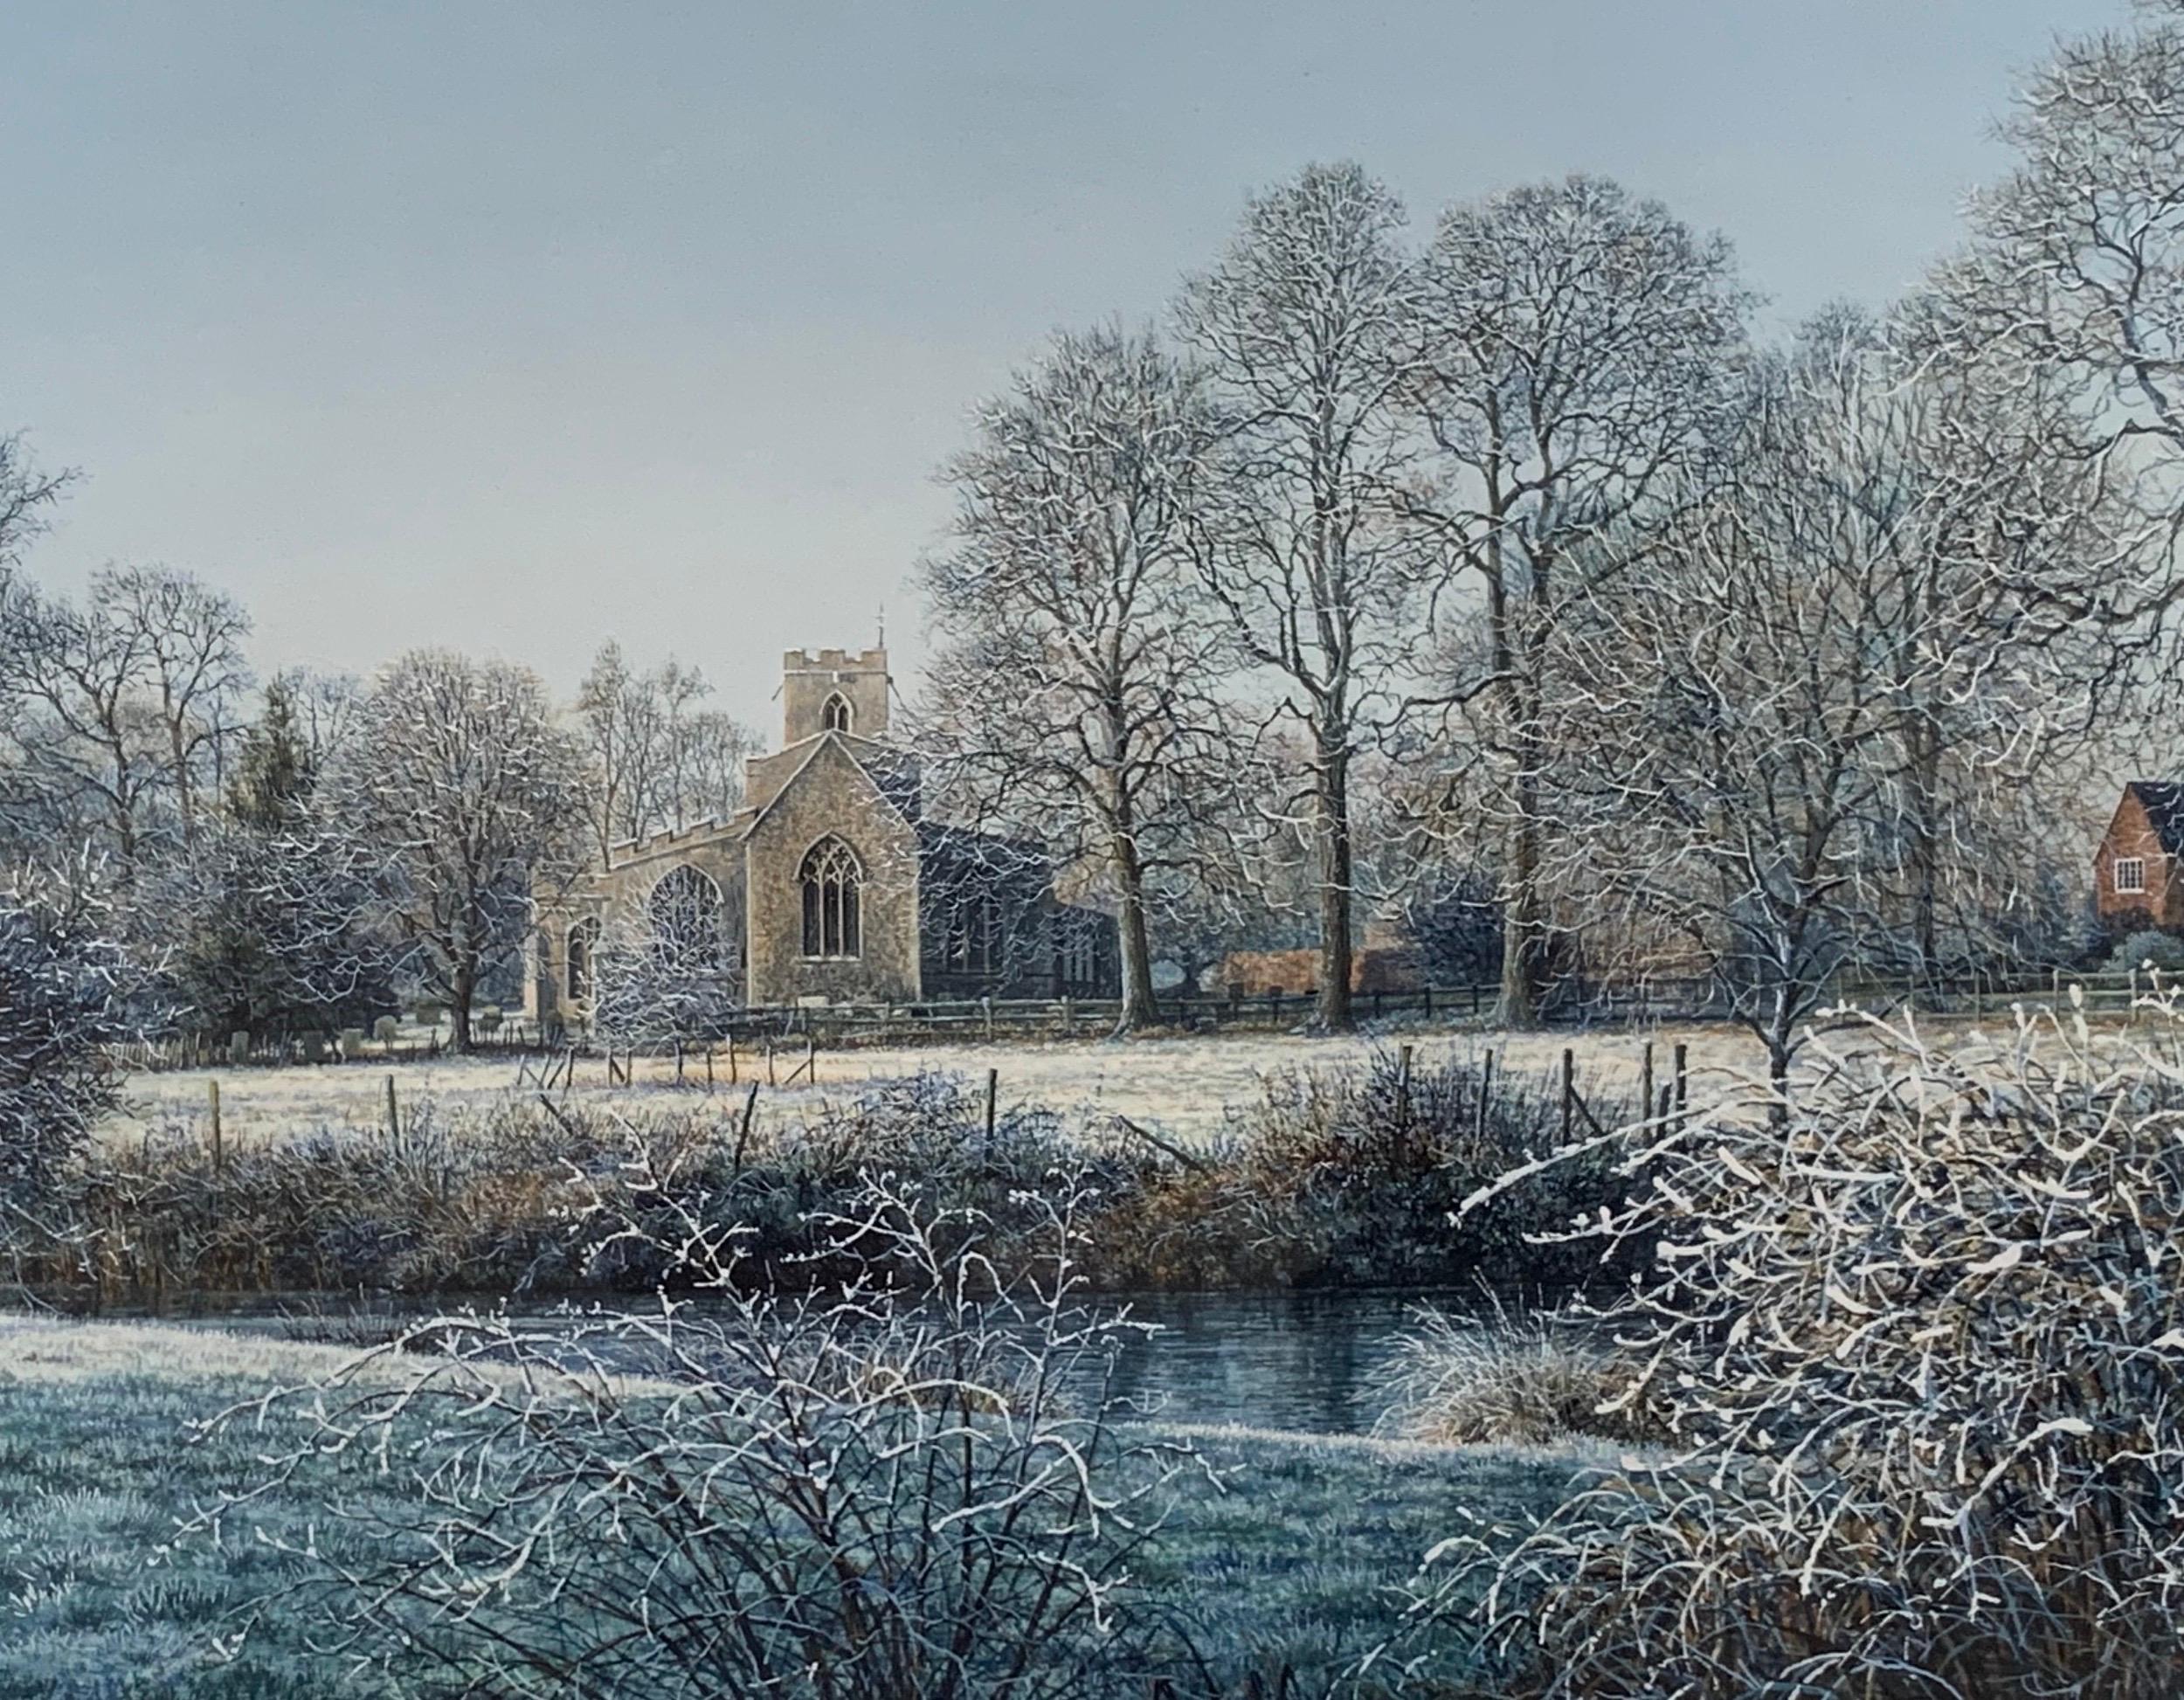 Winter Landscape with Trees, River & Church Watercolour by British Artist. Signed Original Watercolour, housed in a gilt glazed frame. 

Art measures 14 x 10 inches
Frame Measures 20 x 16 inches (approx.) 